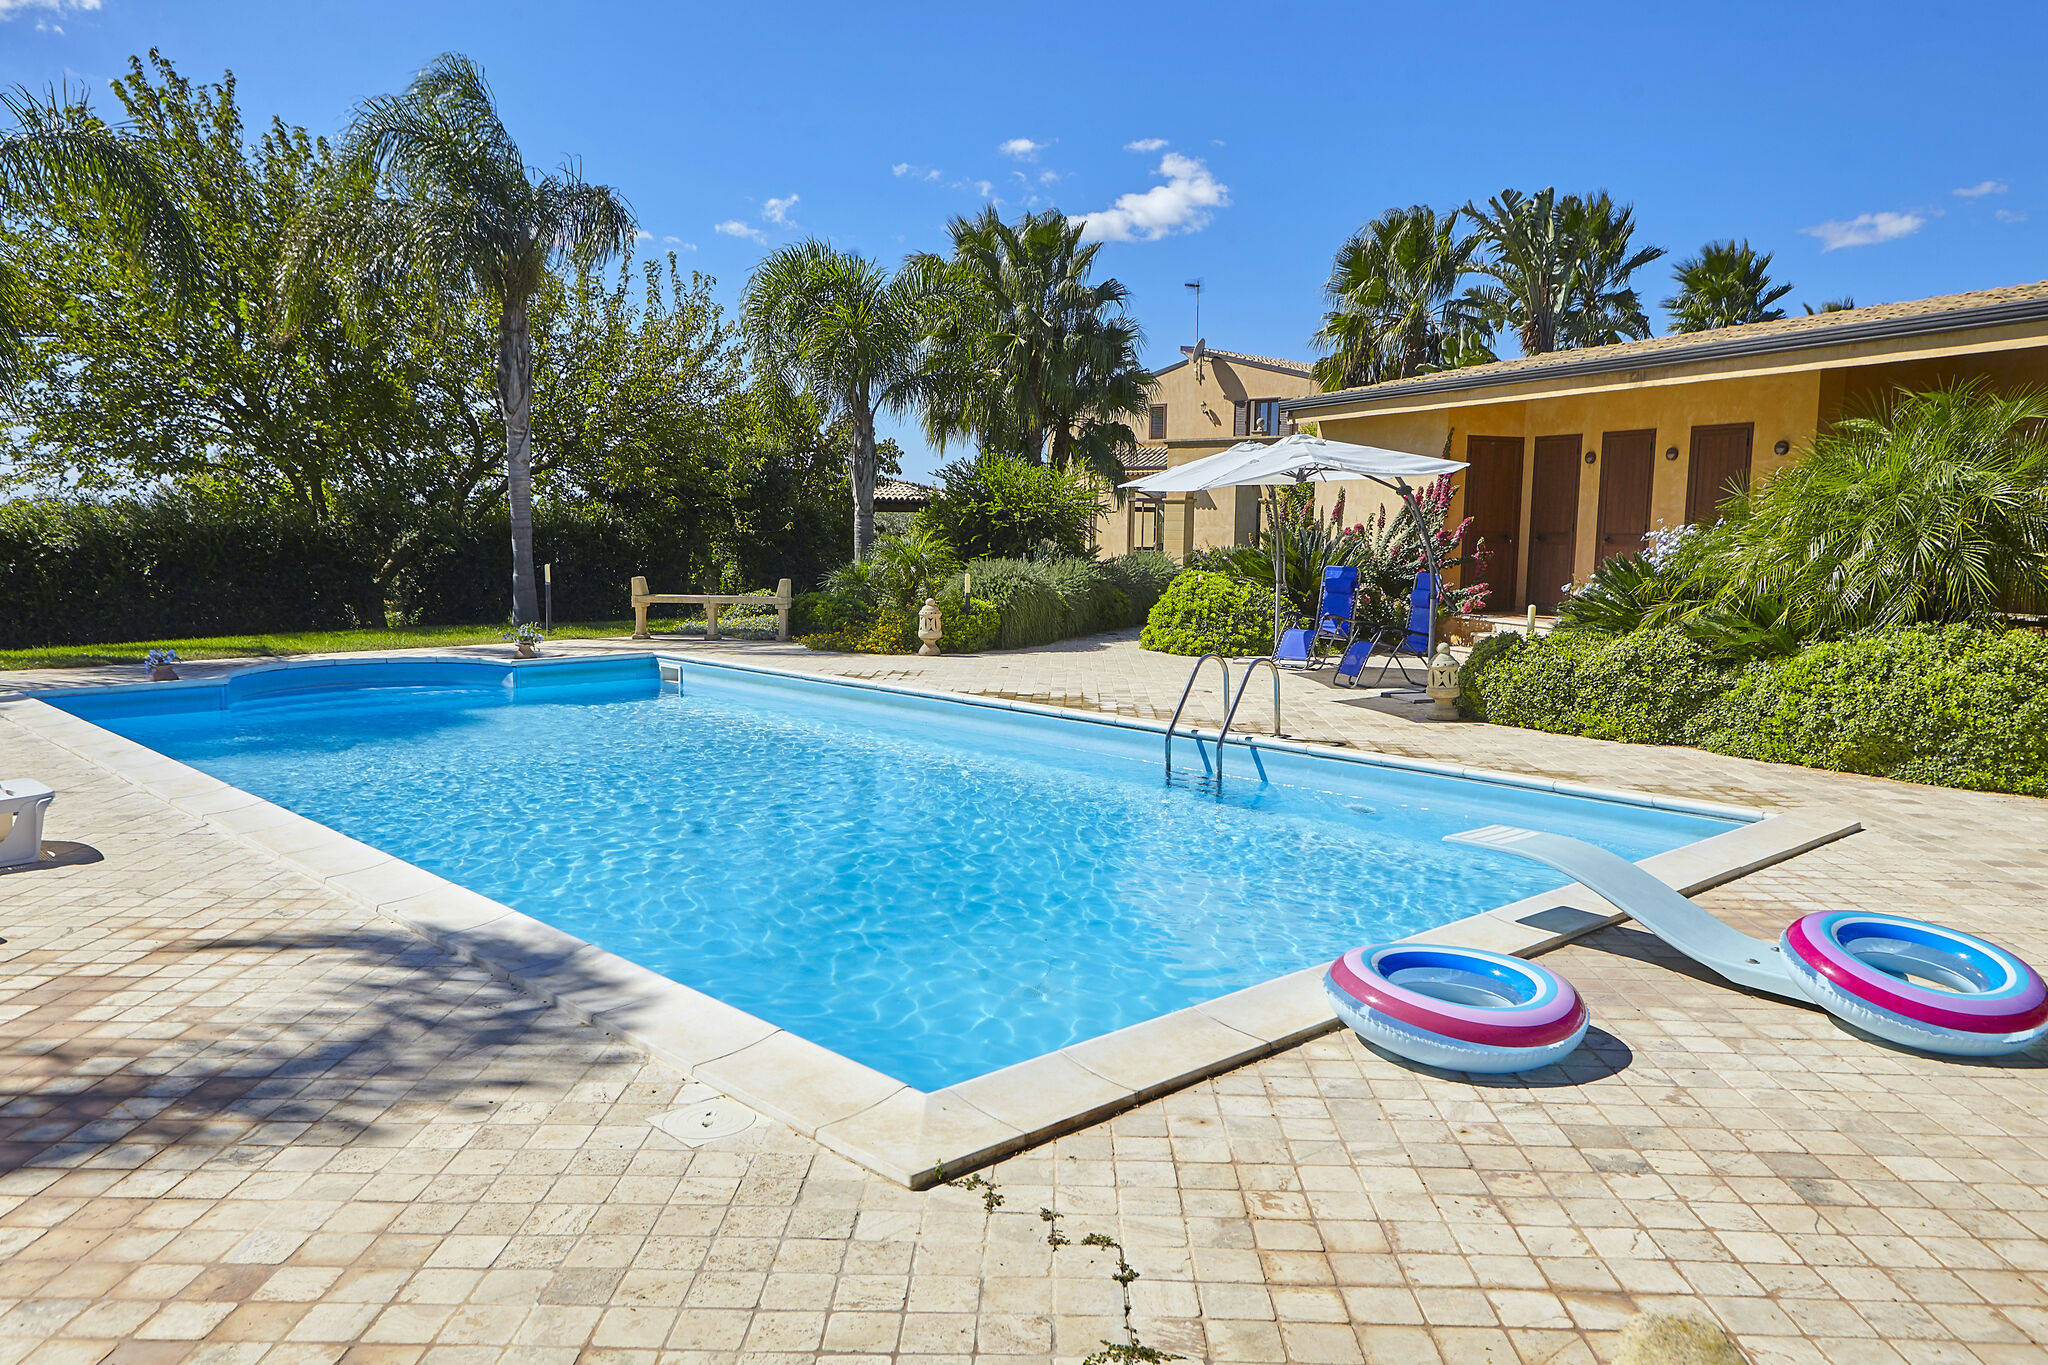 Villa with swimming pool, close to the Selinunte Archaeological Park